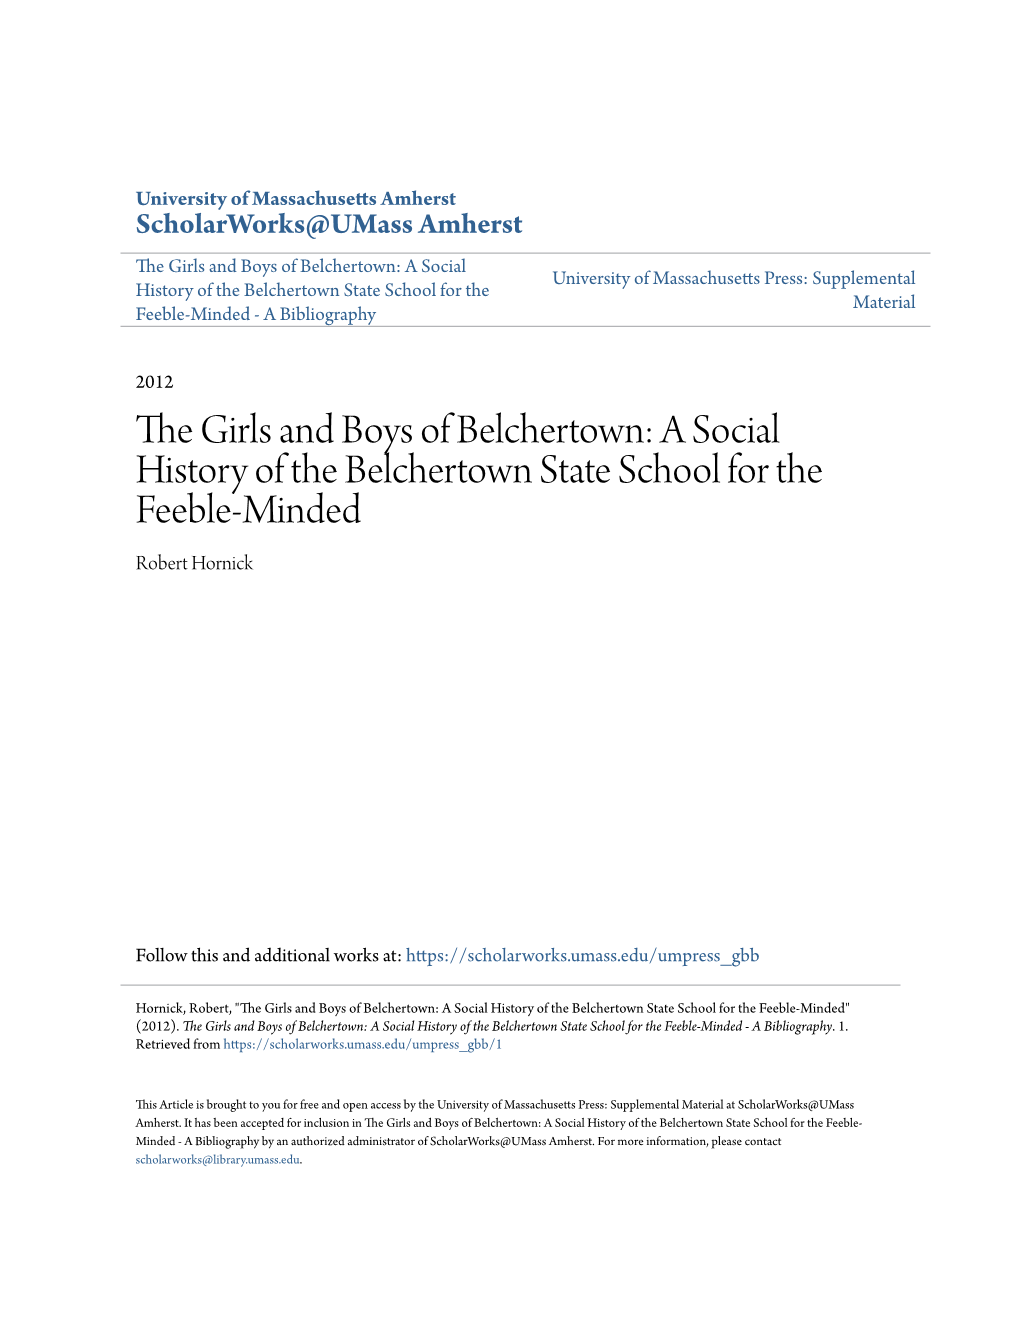 A Social History of the Belchertown State School for the Feeble-Minded Robert Hornick